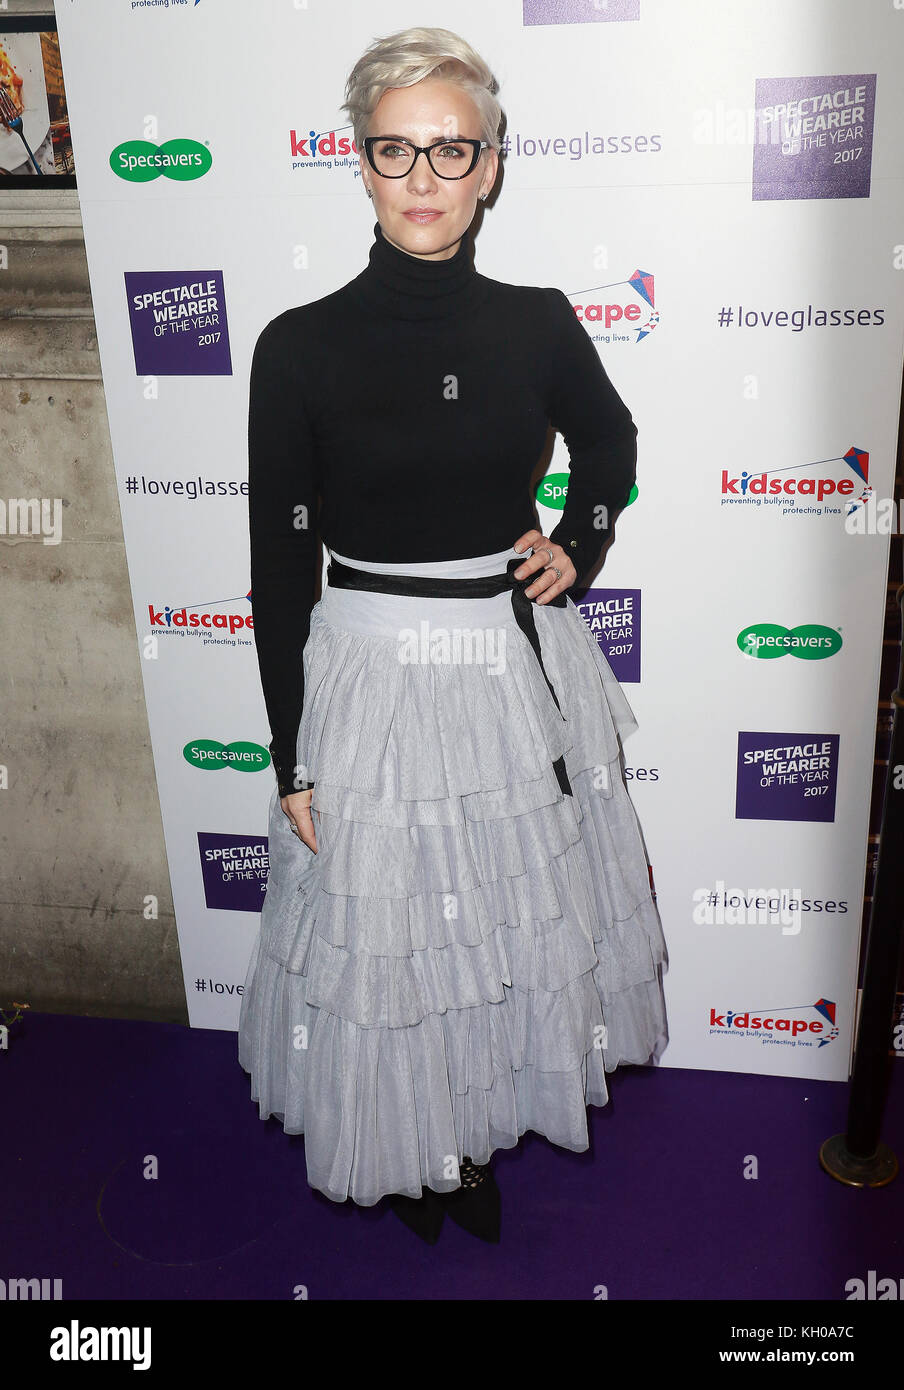 Specsavers' Spectacle Wearer of the Year at 8 Northumberland Avenue, London  Featuring: Claire Richards Where: London, United Kingdom When: 10 Oct 2017 Credit: WENN.com Stock Photo